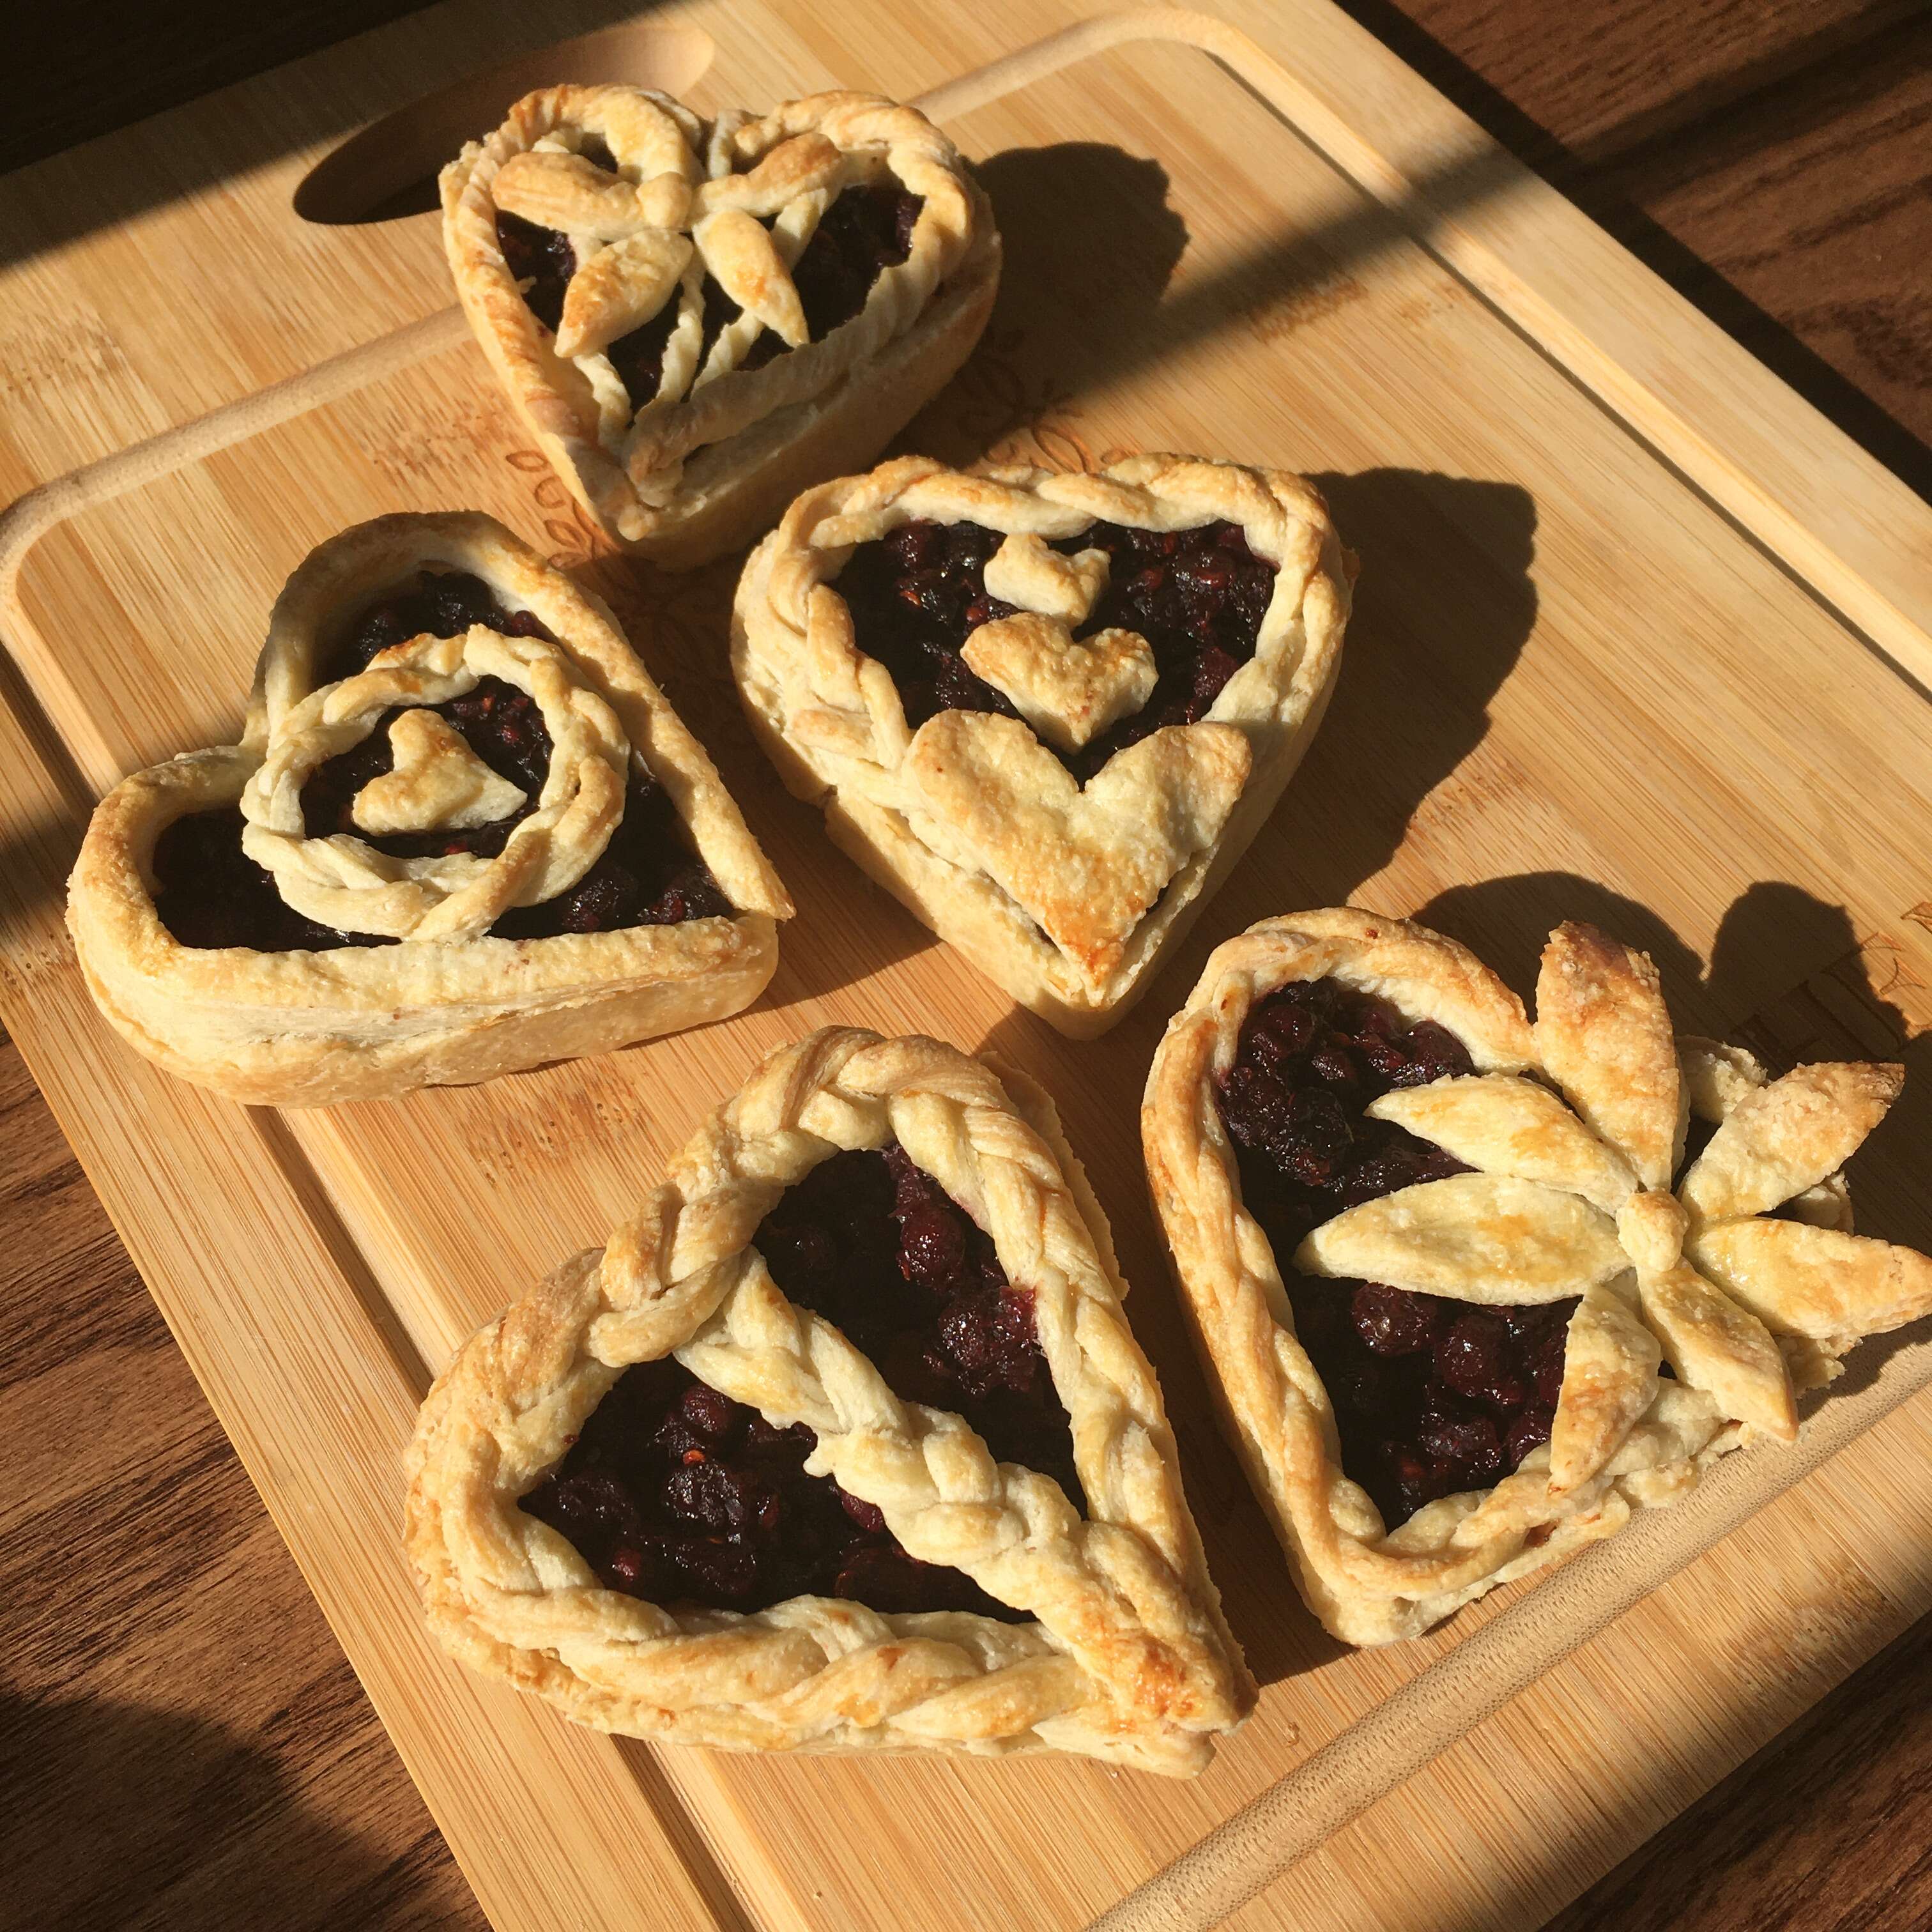 Heart-shaped pies made with saskatoonberries and cherries picked from neighbours' trees